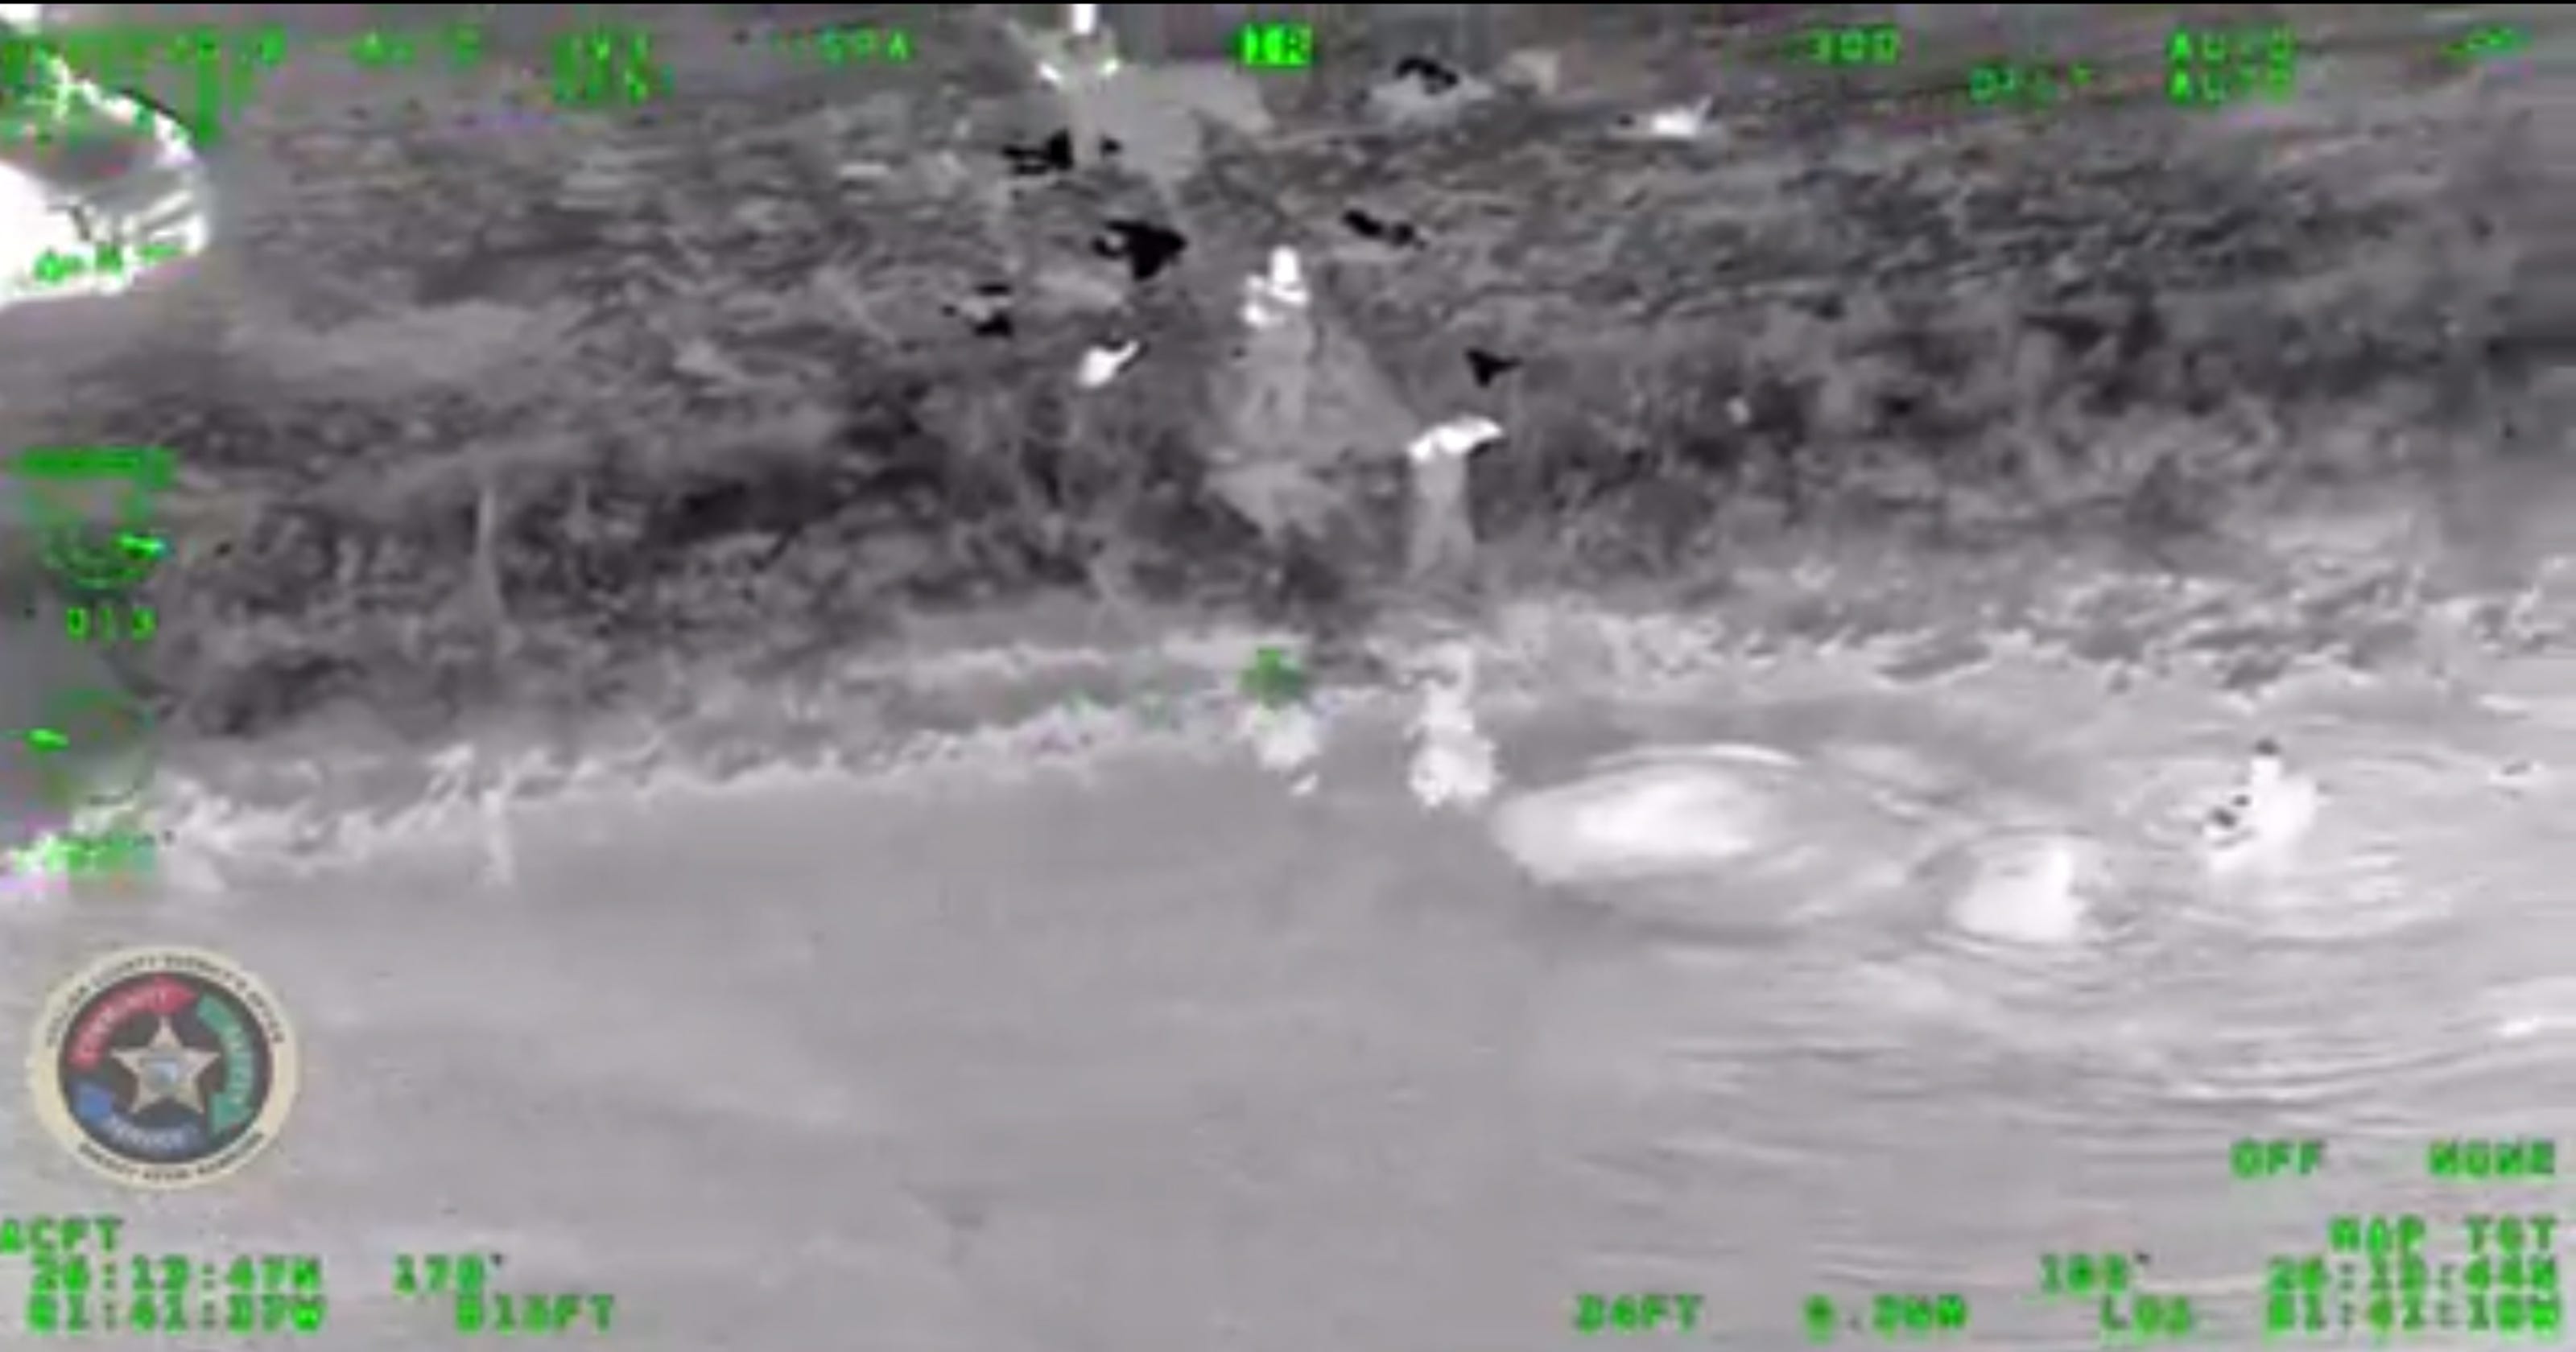 Collier County Sheriff s Office Releases Dramatic Water Rescue Video